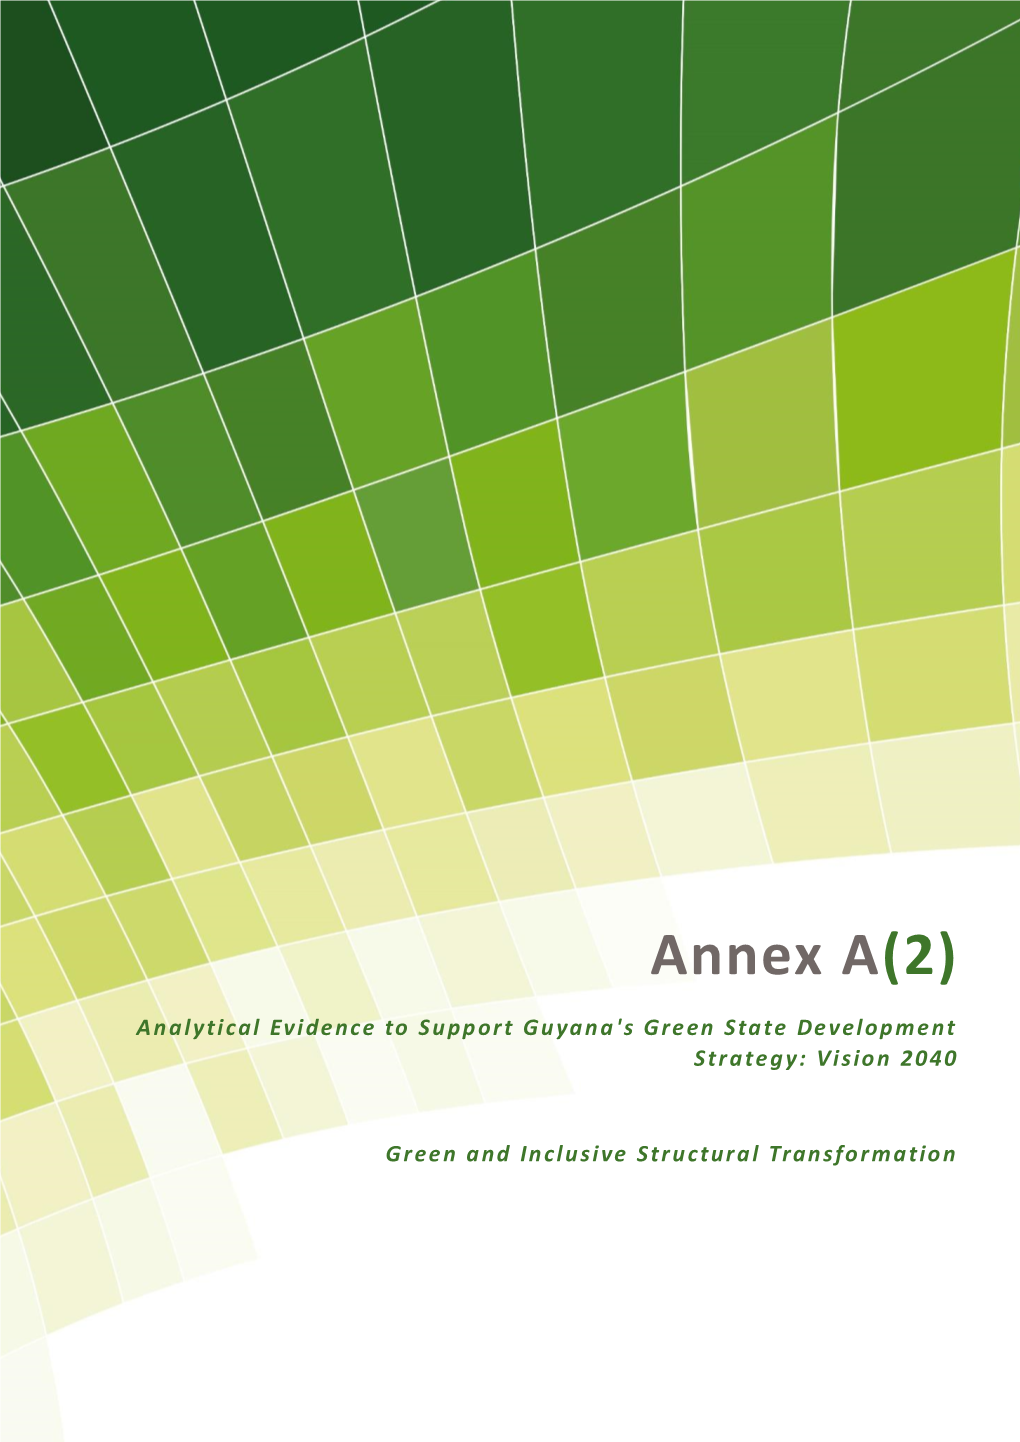 Green and Inclusive Structural Transformation